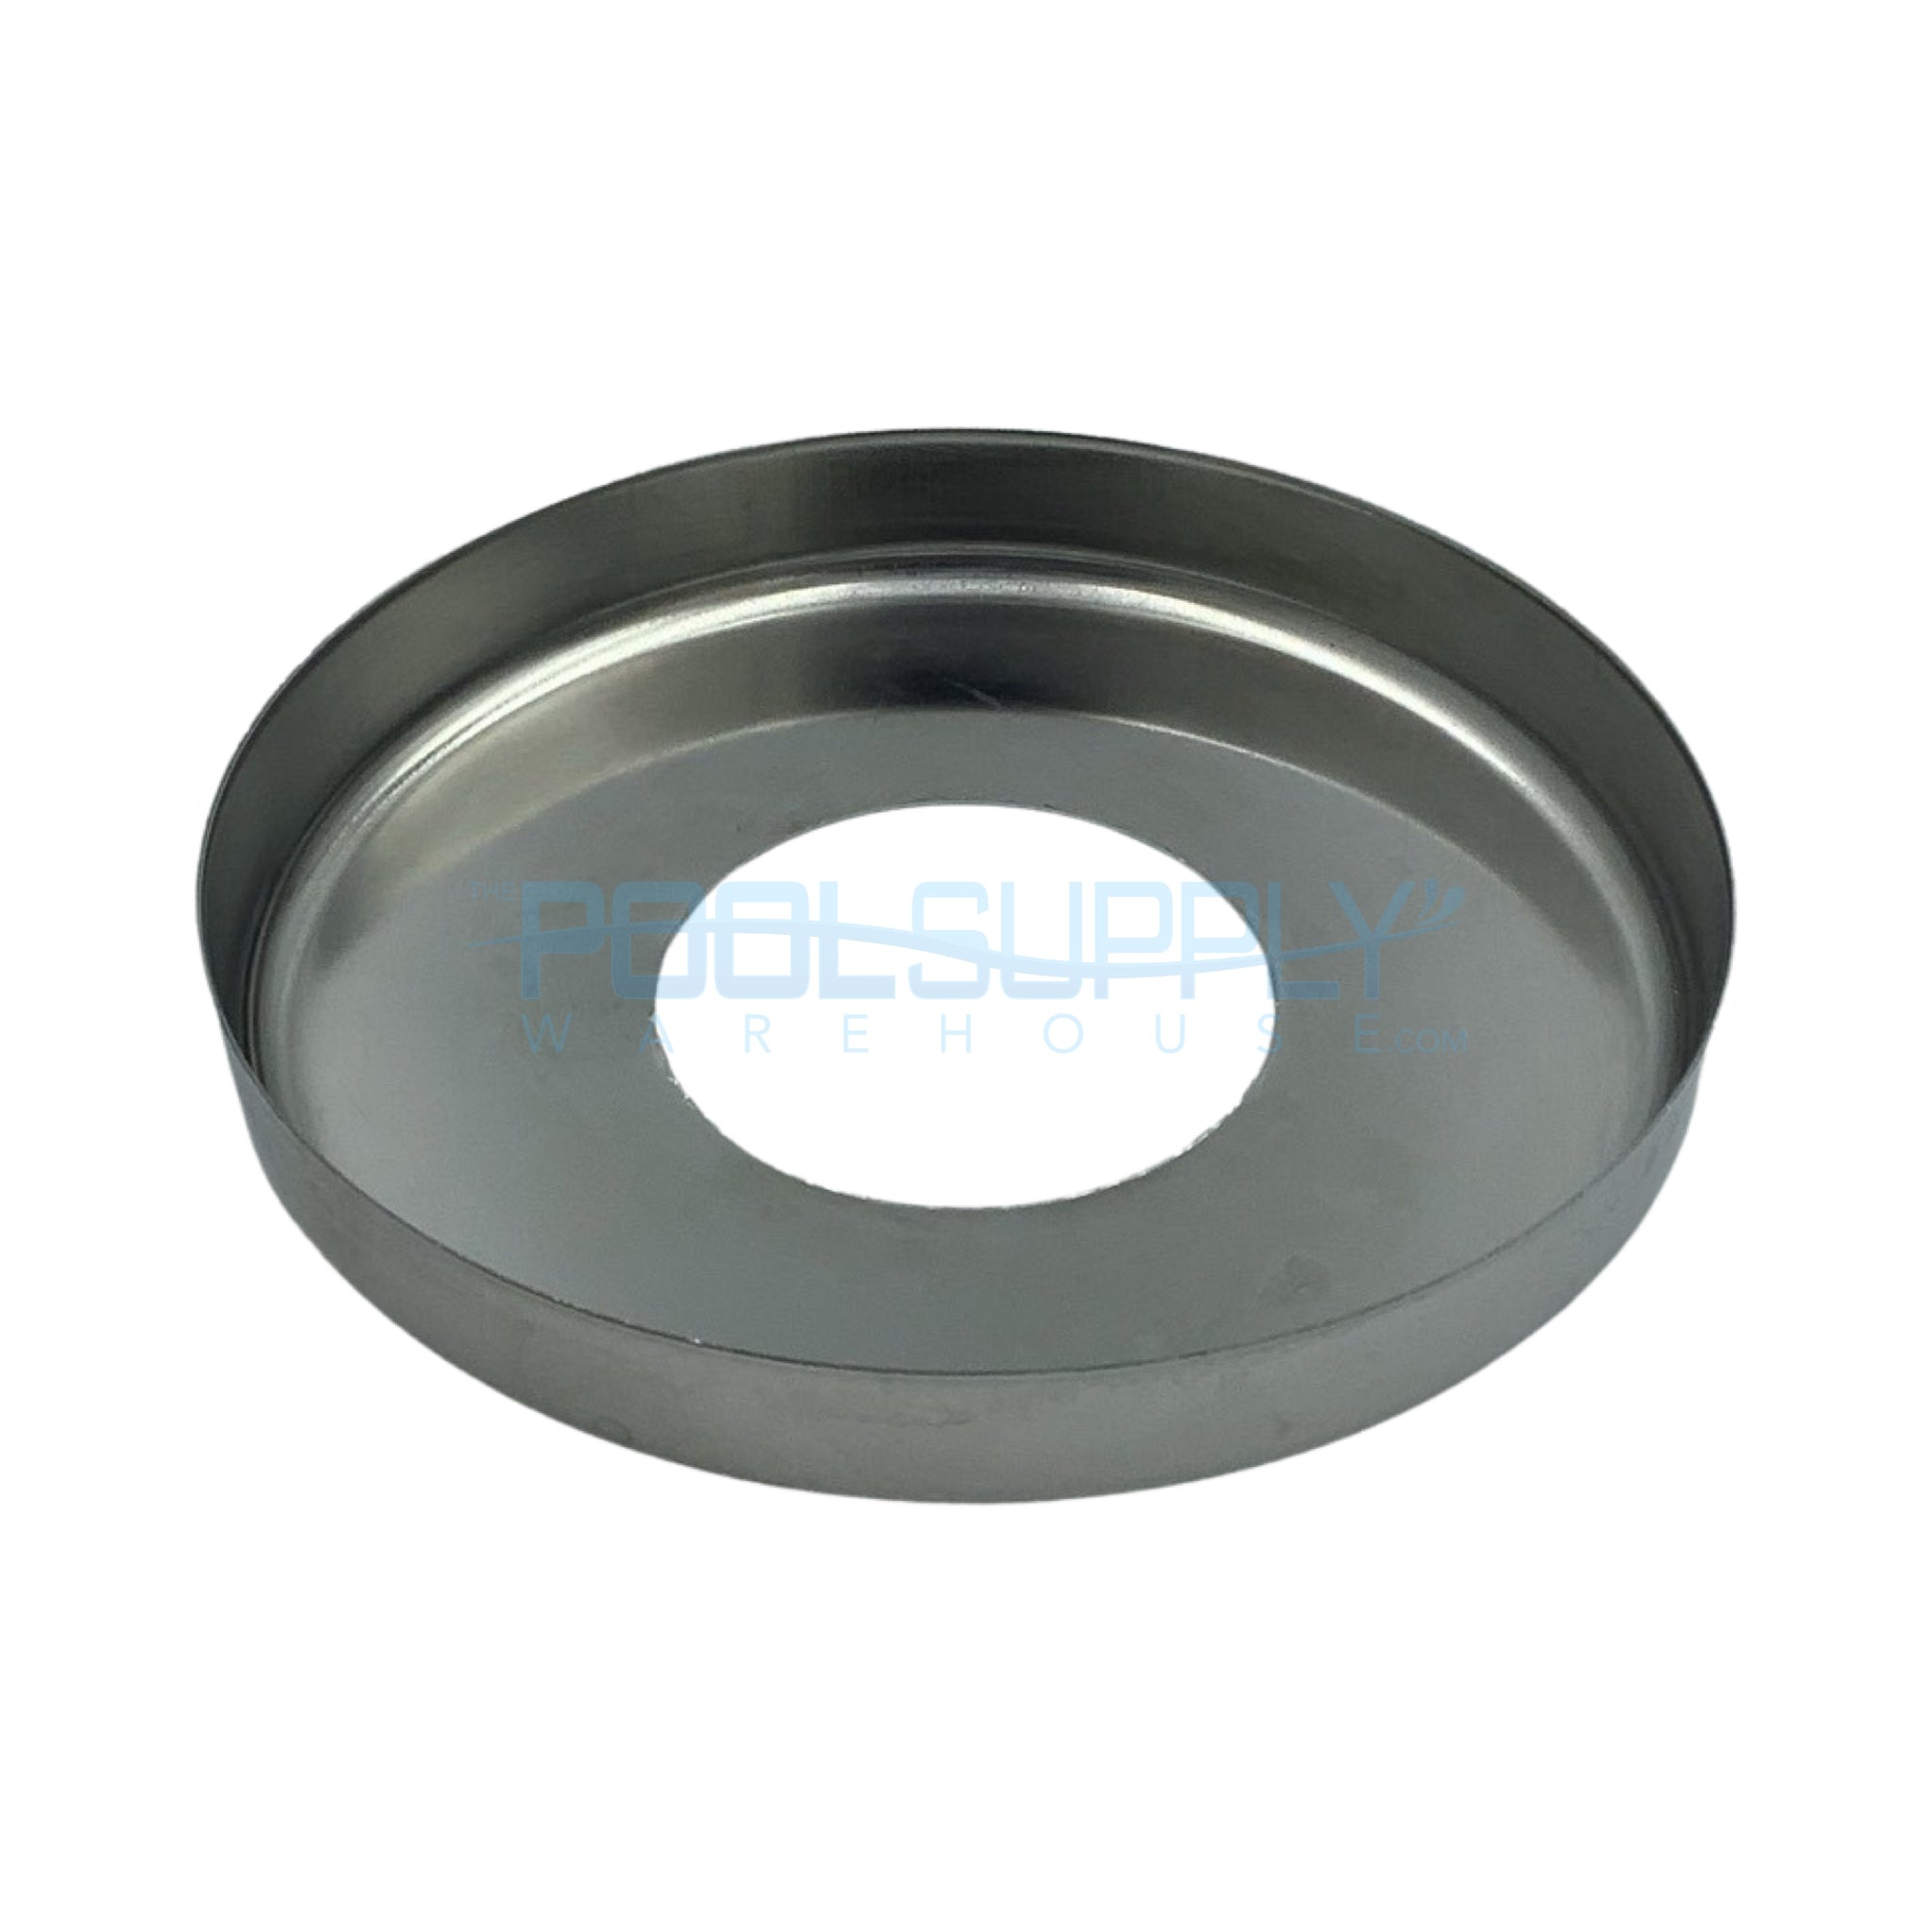 SR Smith Round Escutcheon For Rails with 1.9" OD Tubing - EP-100F-MG - The Pool Supply Warehouse